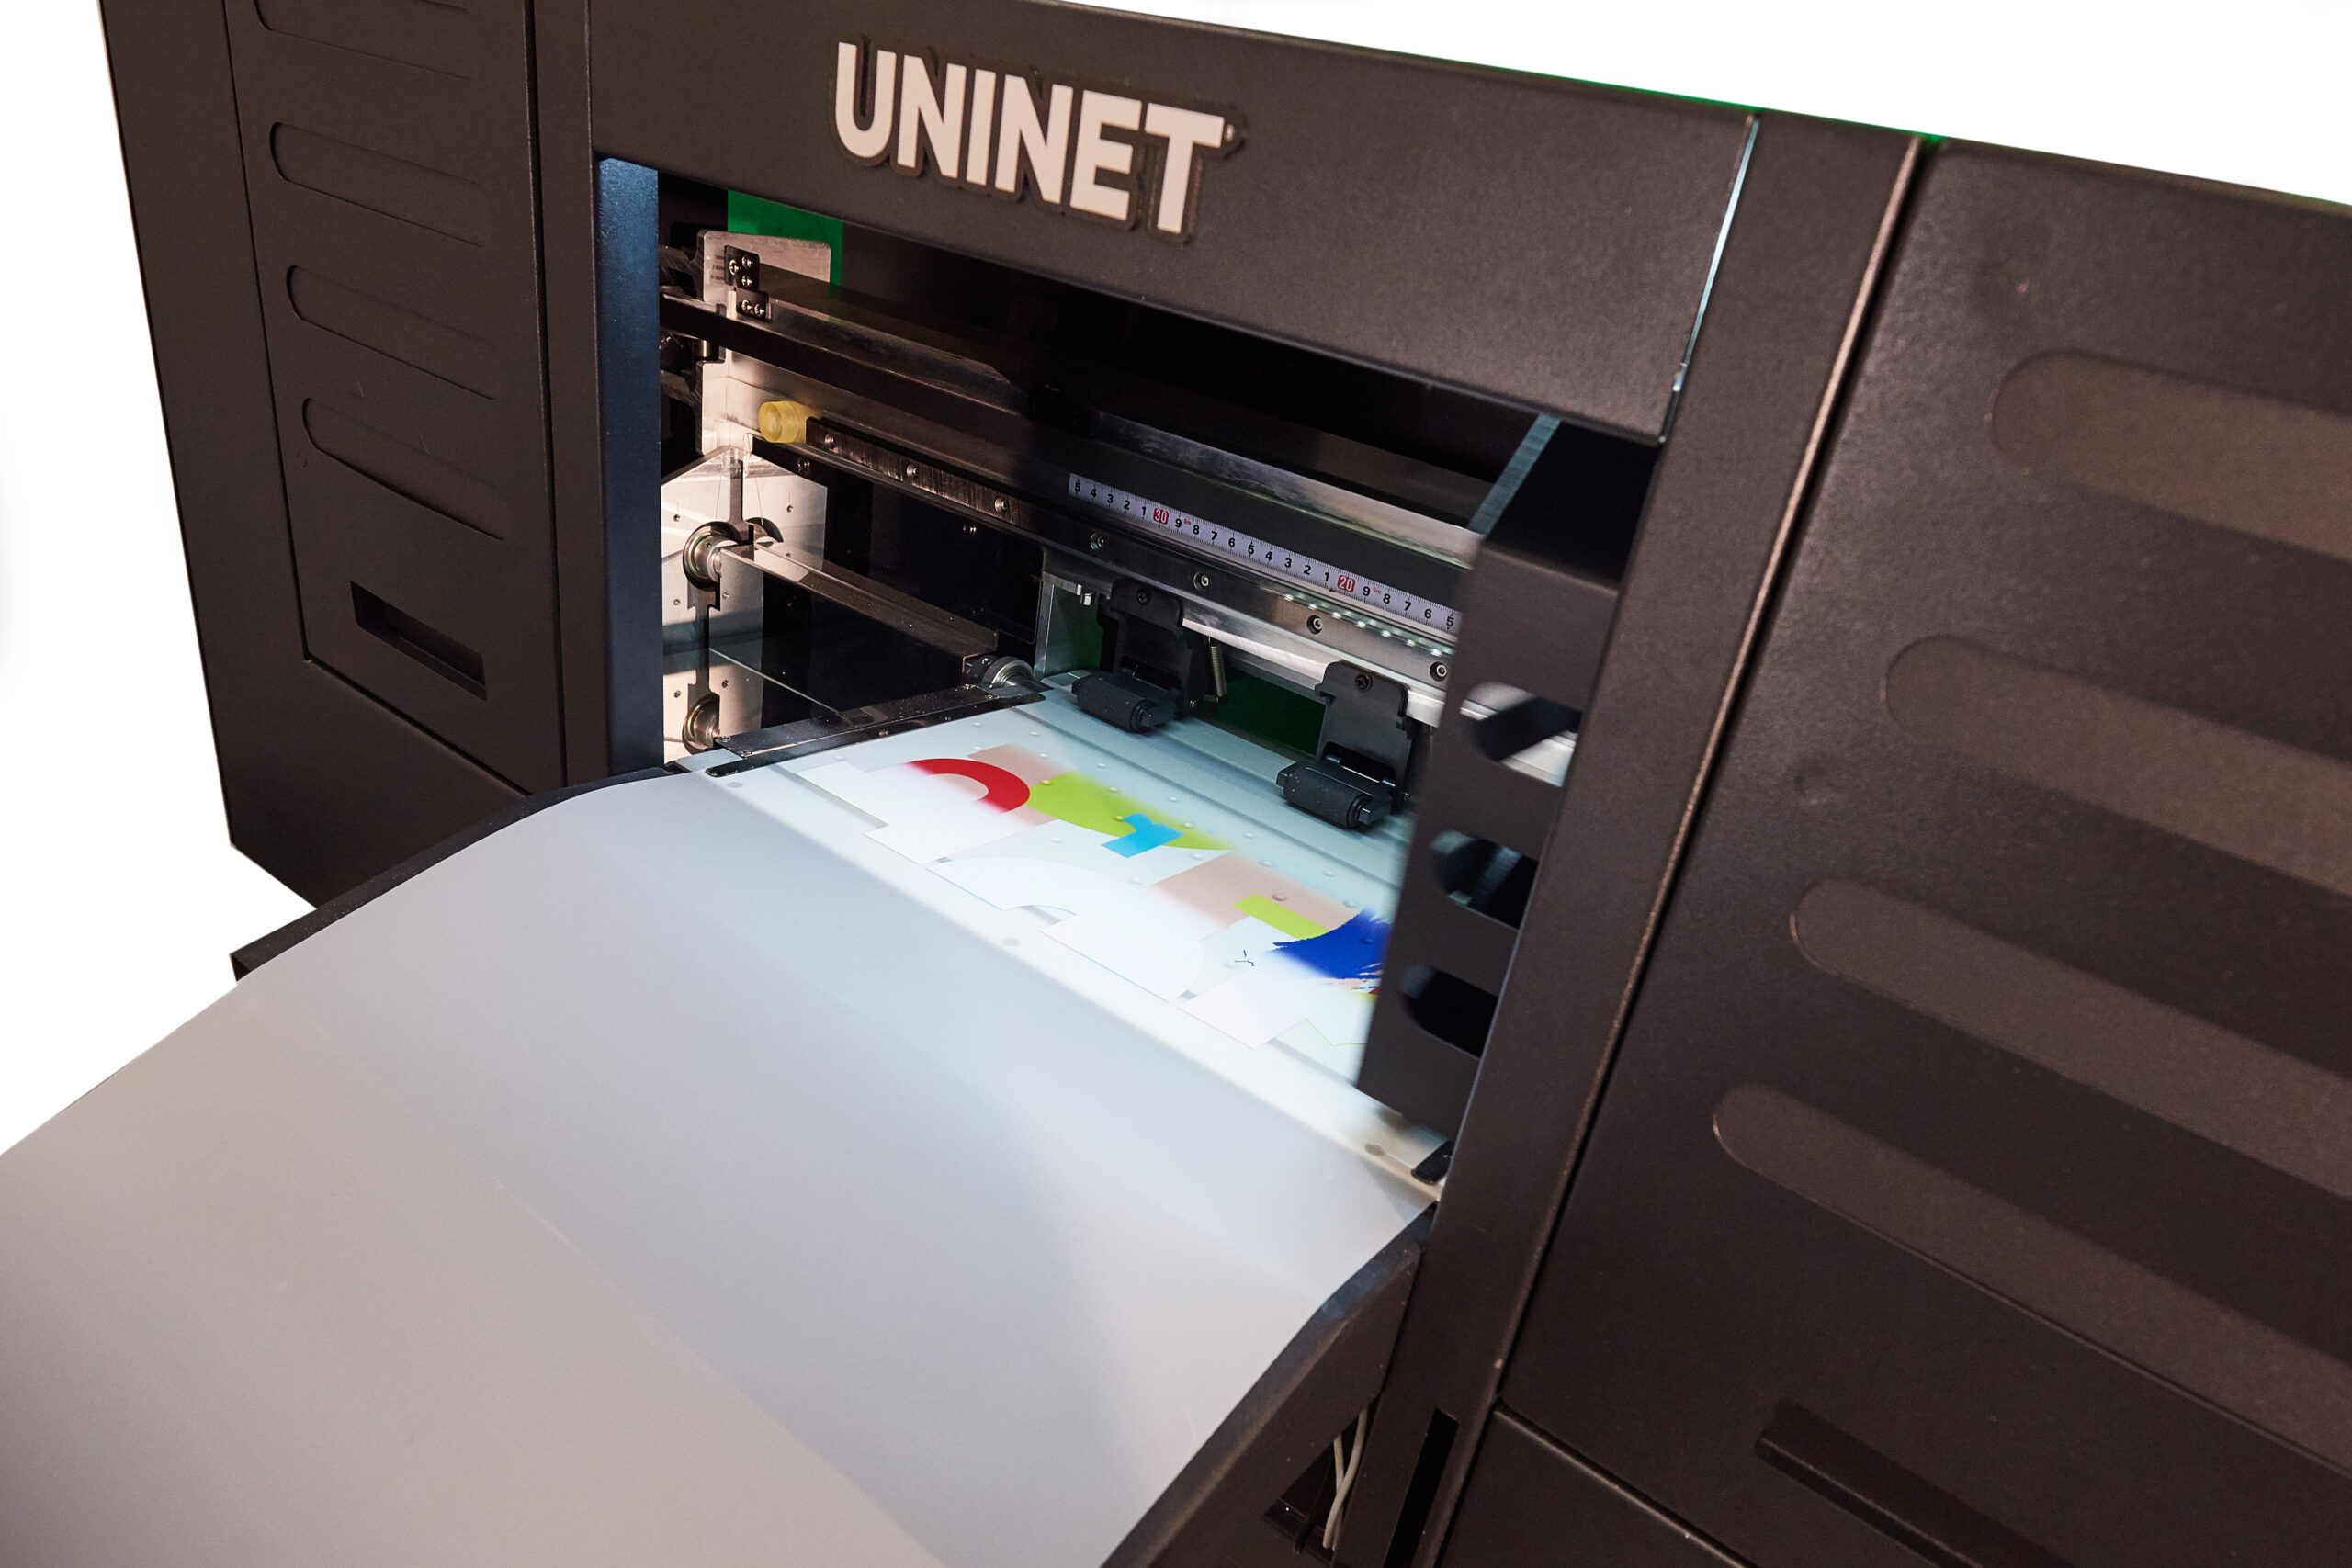 UniNet DTF 100 A3+ Sheet Printer Supply with Oven and Filter Bundle